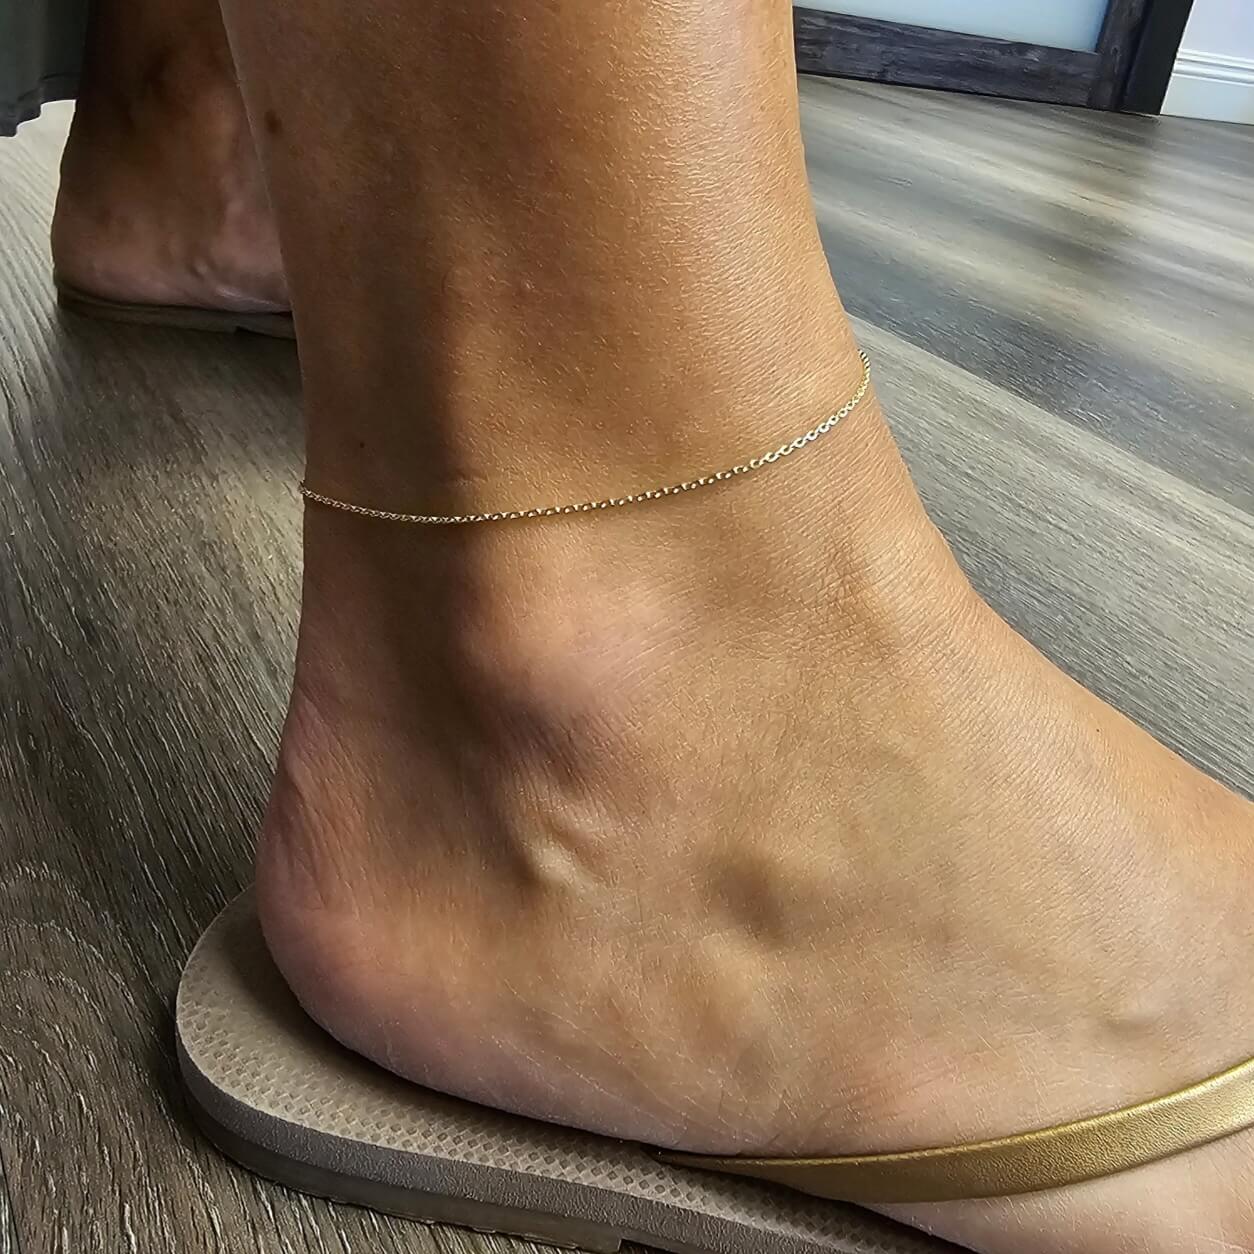 Permanent anklet done with 14k yellow gold